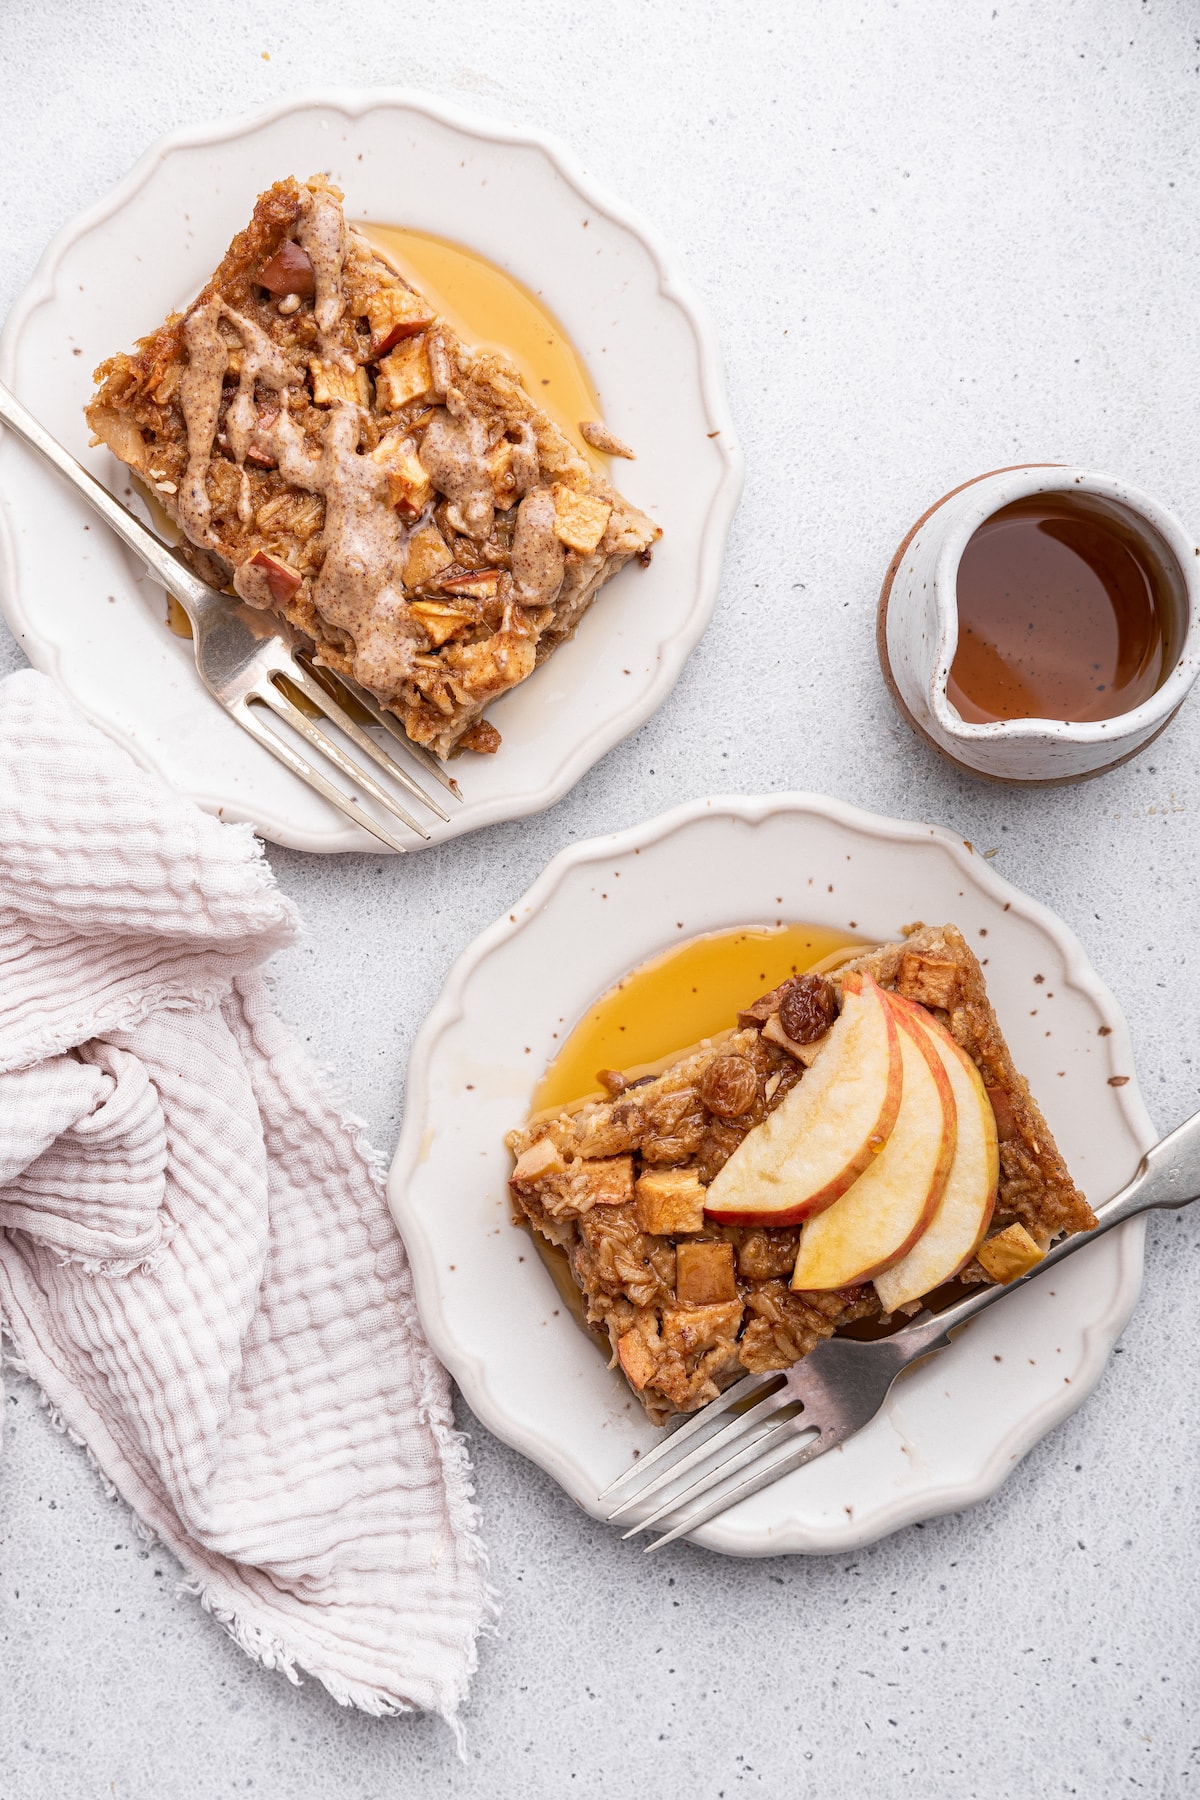 Two slices of apple cinnamon baked oatmeal on separate plates with one slice having sliced apples and maple syrup and the other slice has a drizzle of nut butter.